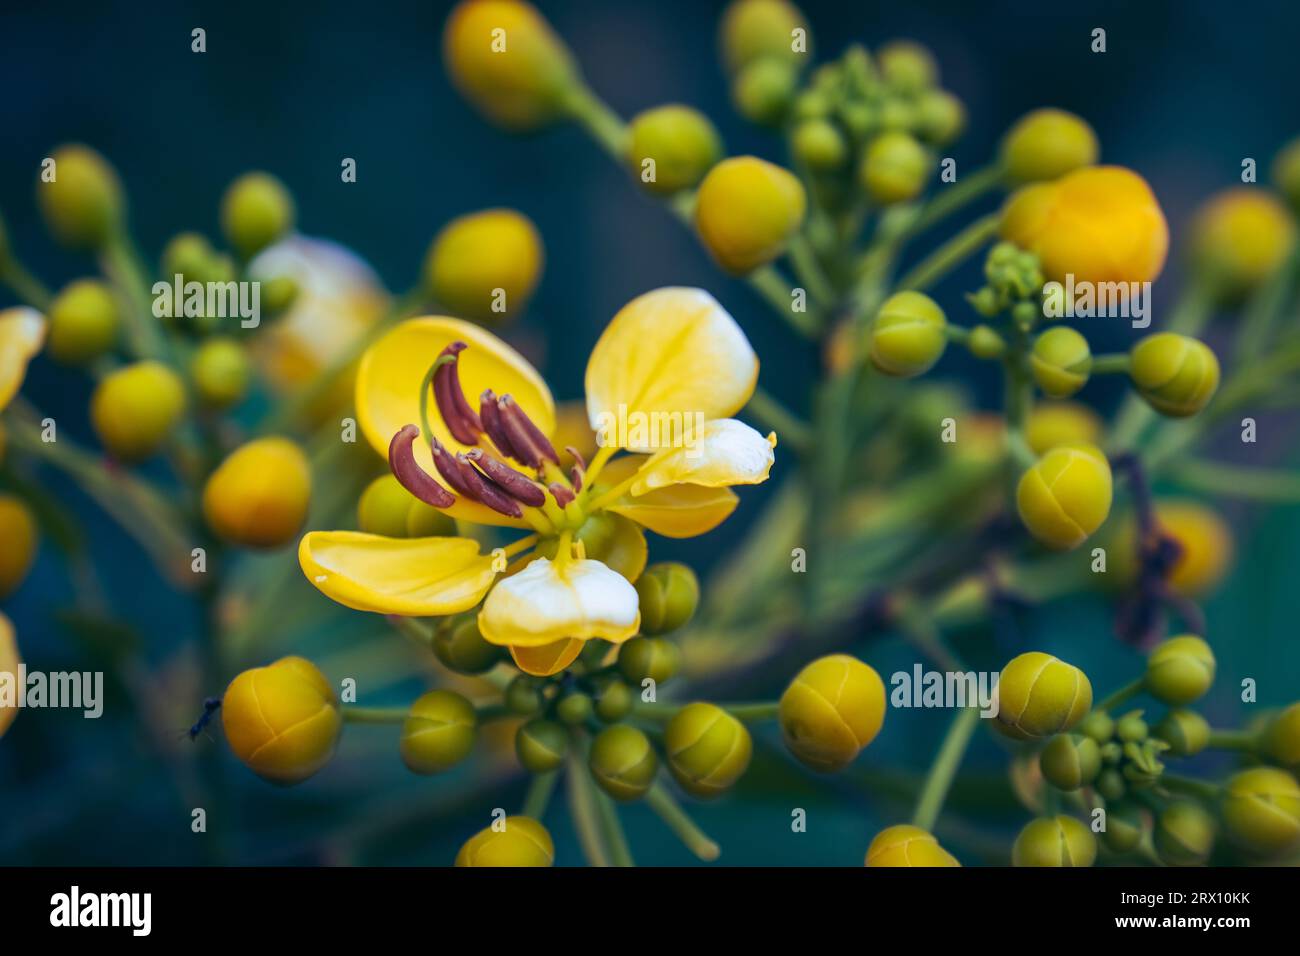 Close-up details of beautiful yellow flowers of the Cassia tree or Cassia garrettiana Craib, a type of tree that thrives in tropical environments Stock Photo